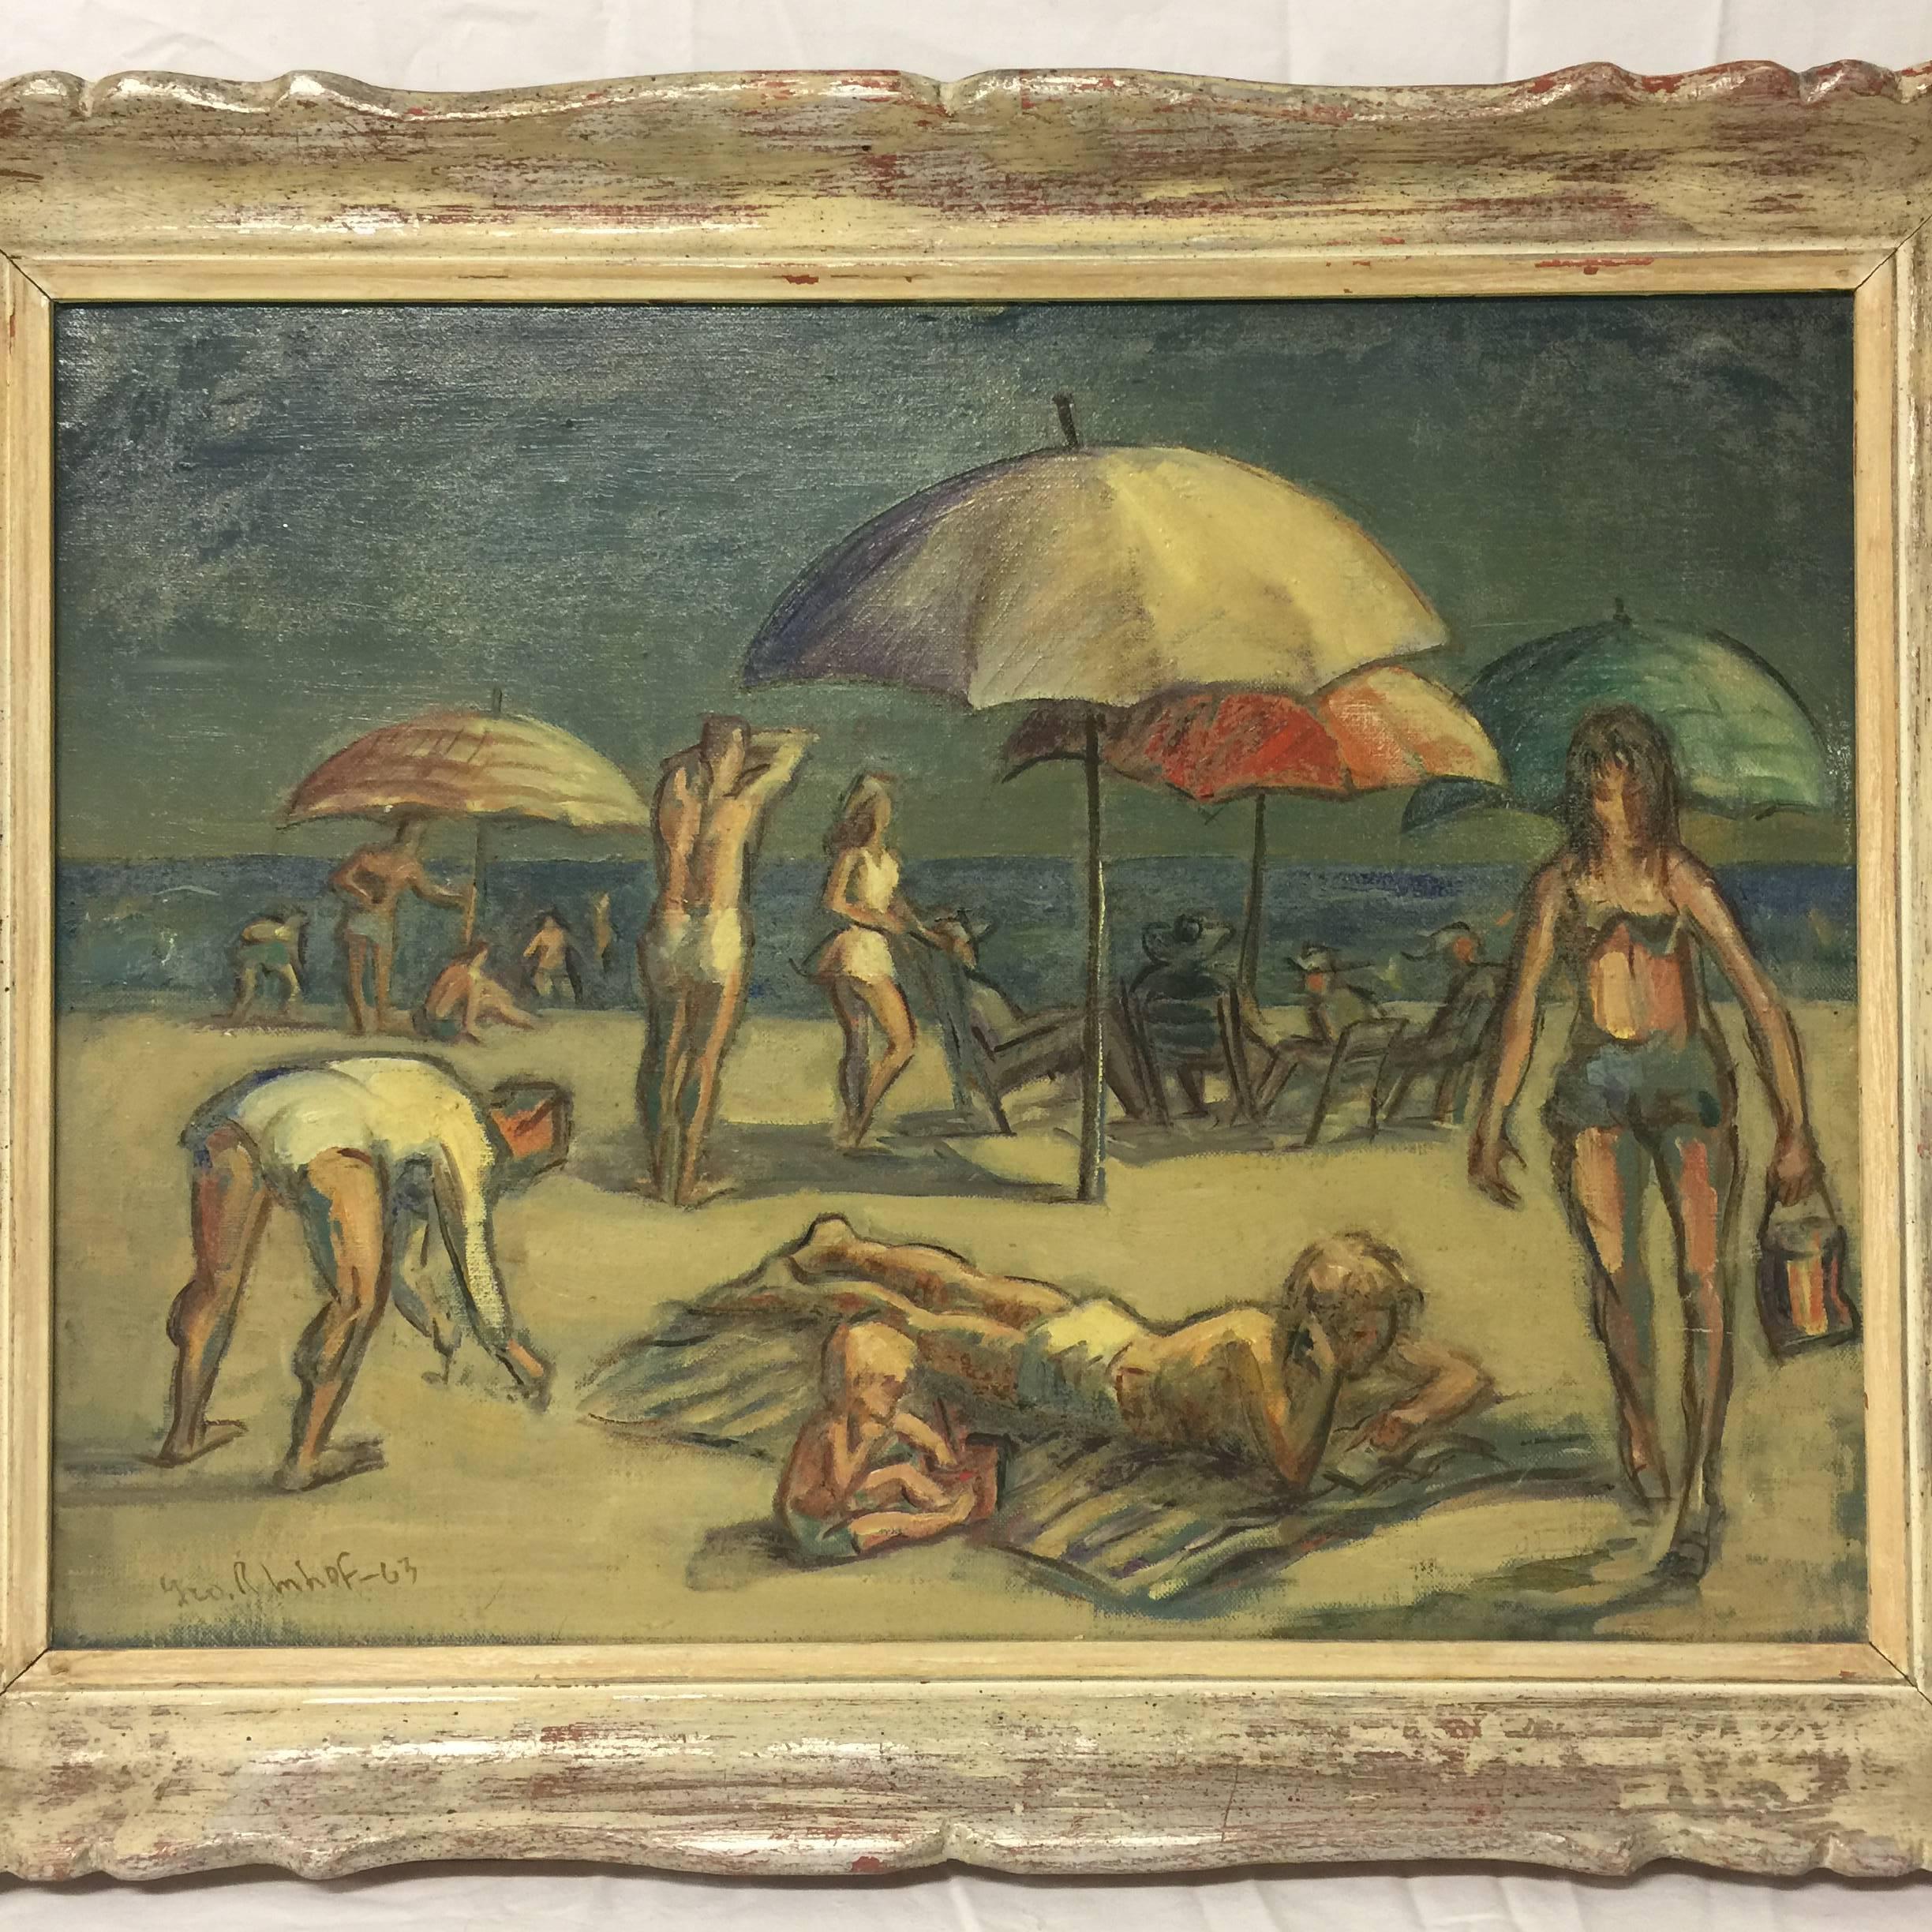 Beach scene painting done in oil paint on canvas depicting a Mid-Century modern scene of beachgoers at a New Jersey beach. Signed and dated Imhof, 1963. In the original period paint decorated picture frame. The sight size of the canvas is 23.5